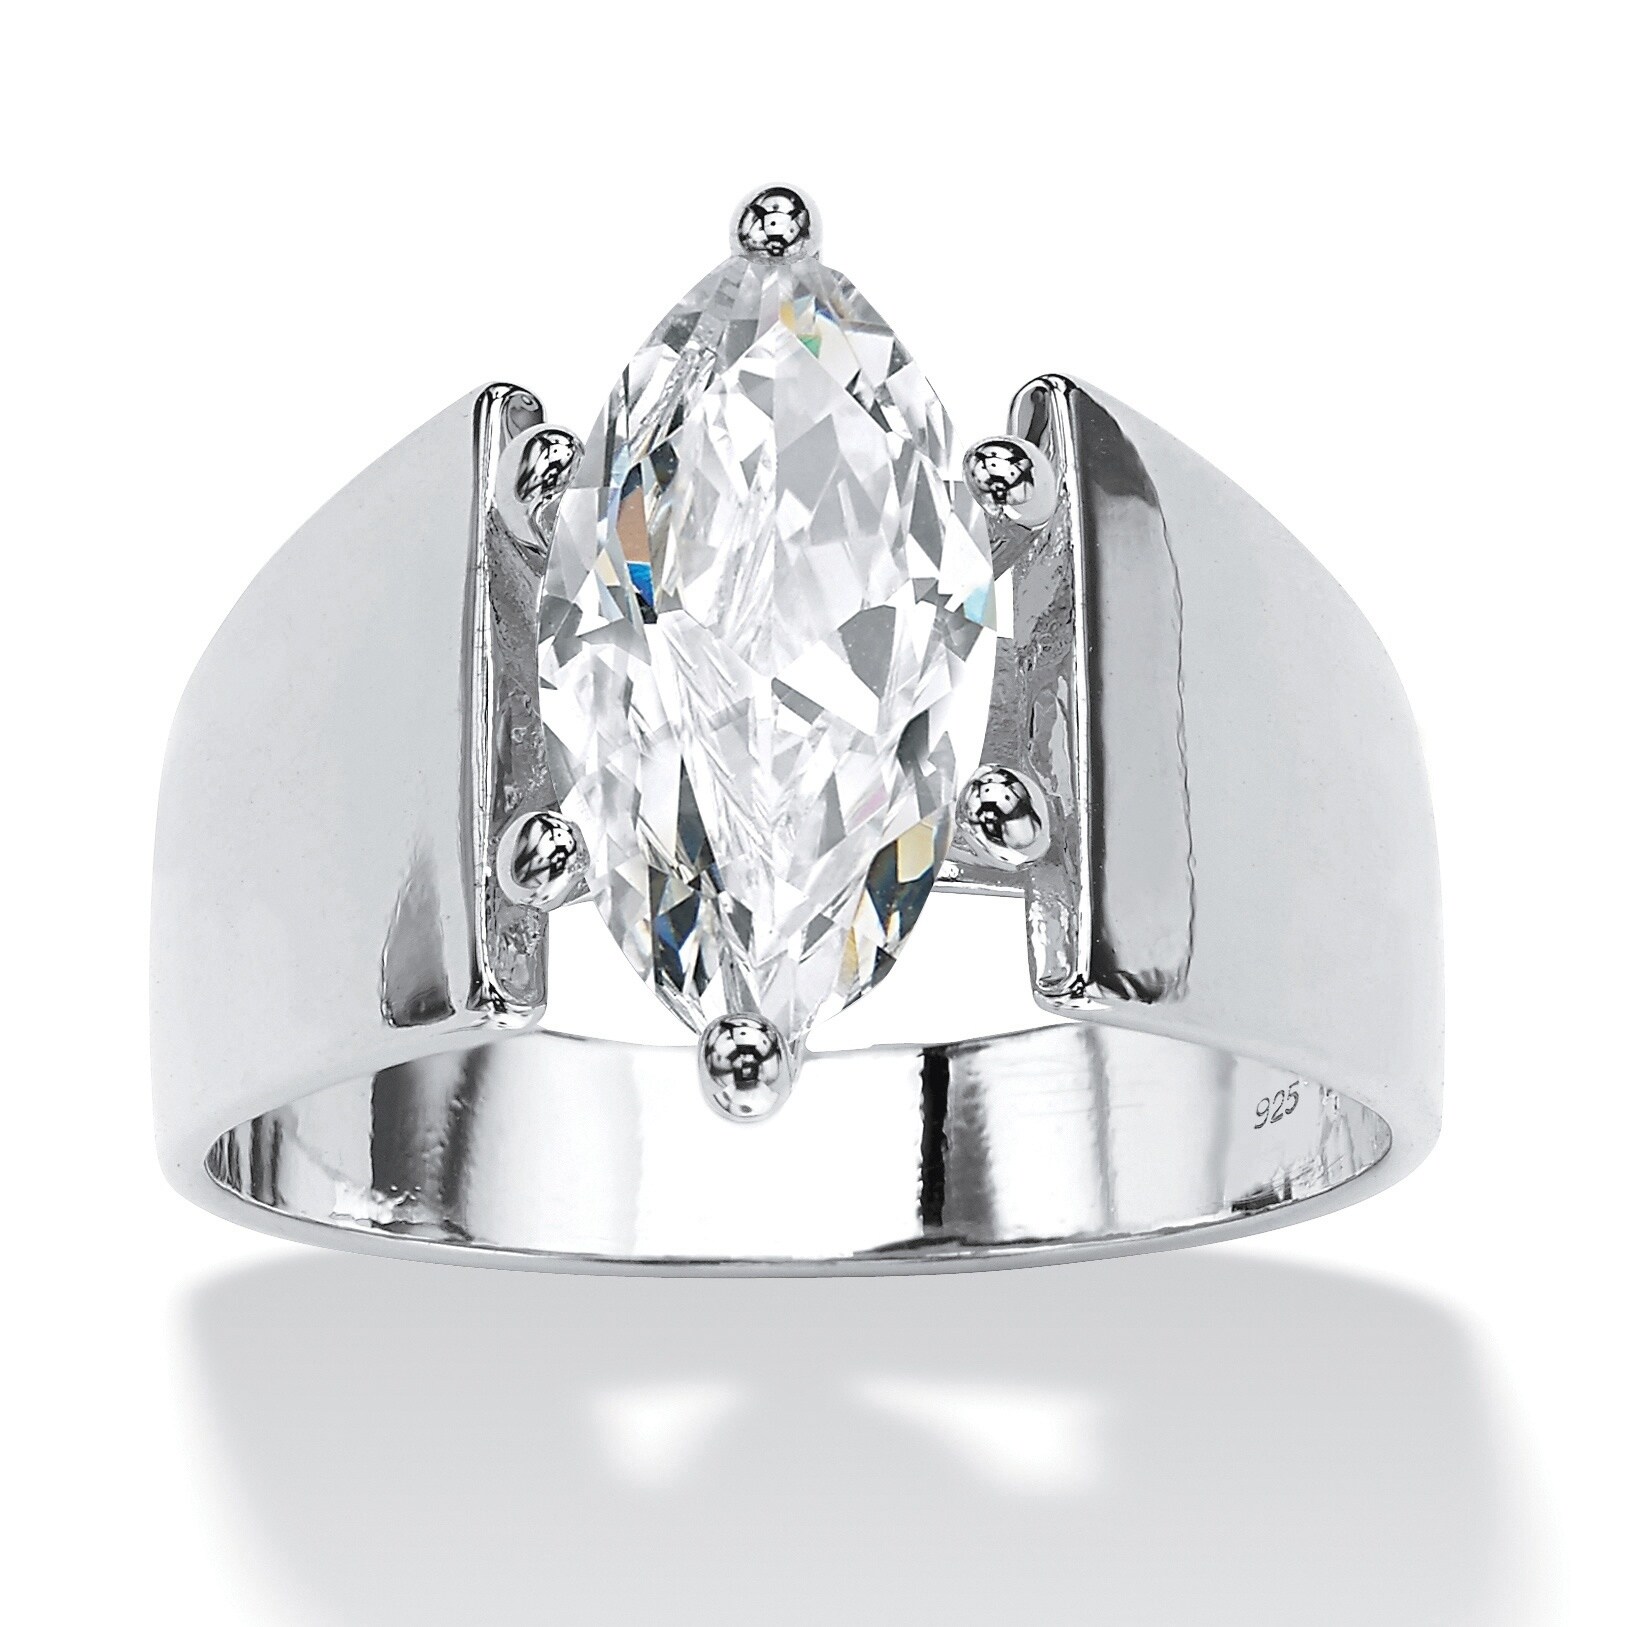 White CZ Unique Square Solitaire Ring New .925 Sterling Silver Band Sizes 5-10